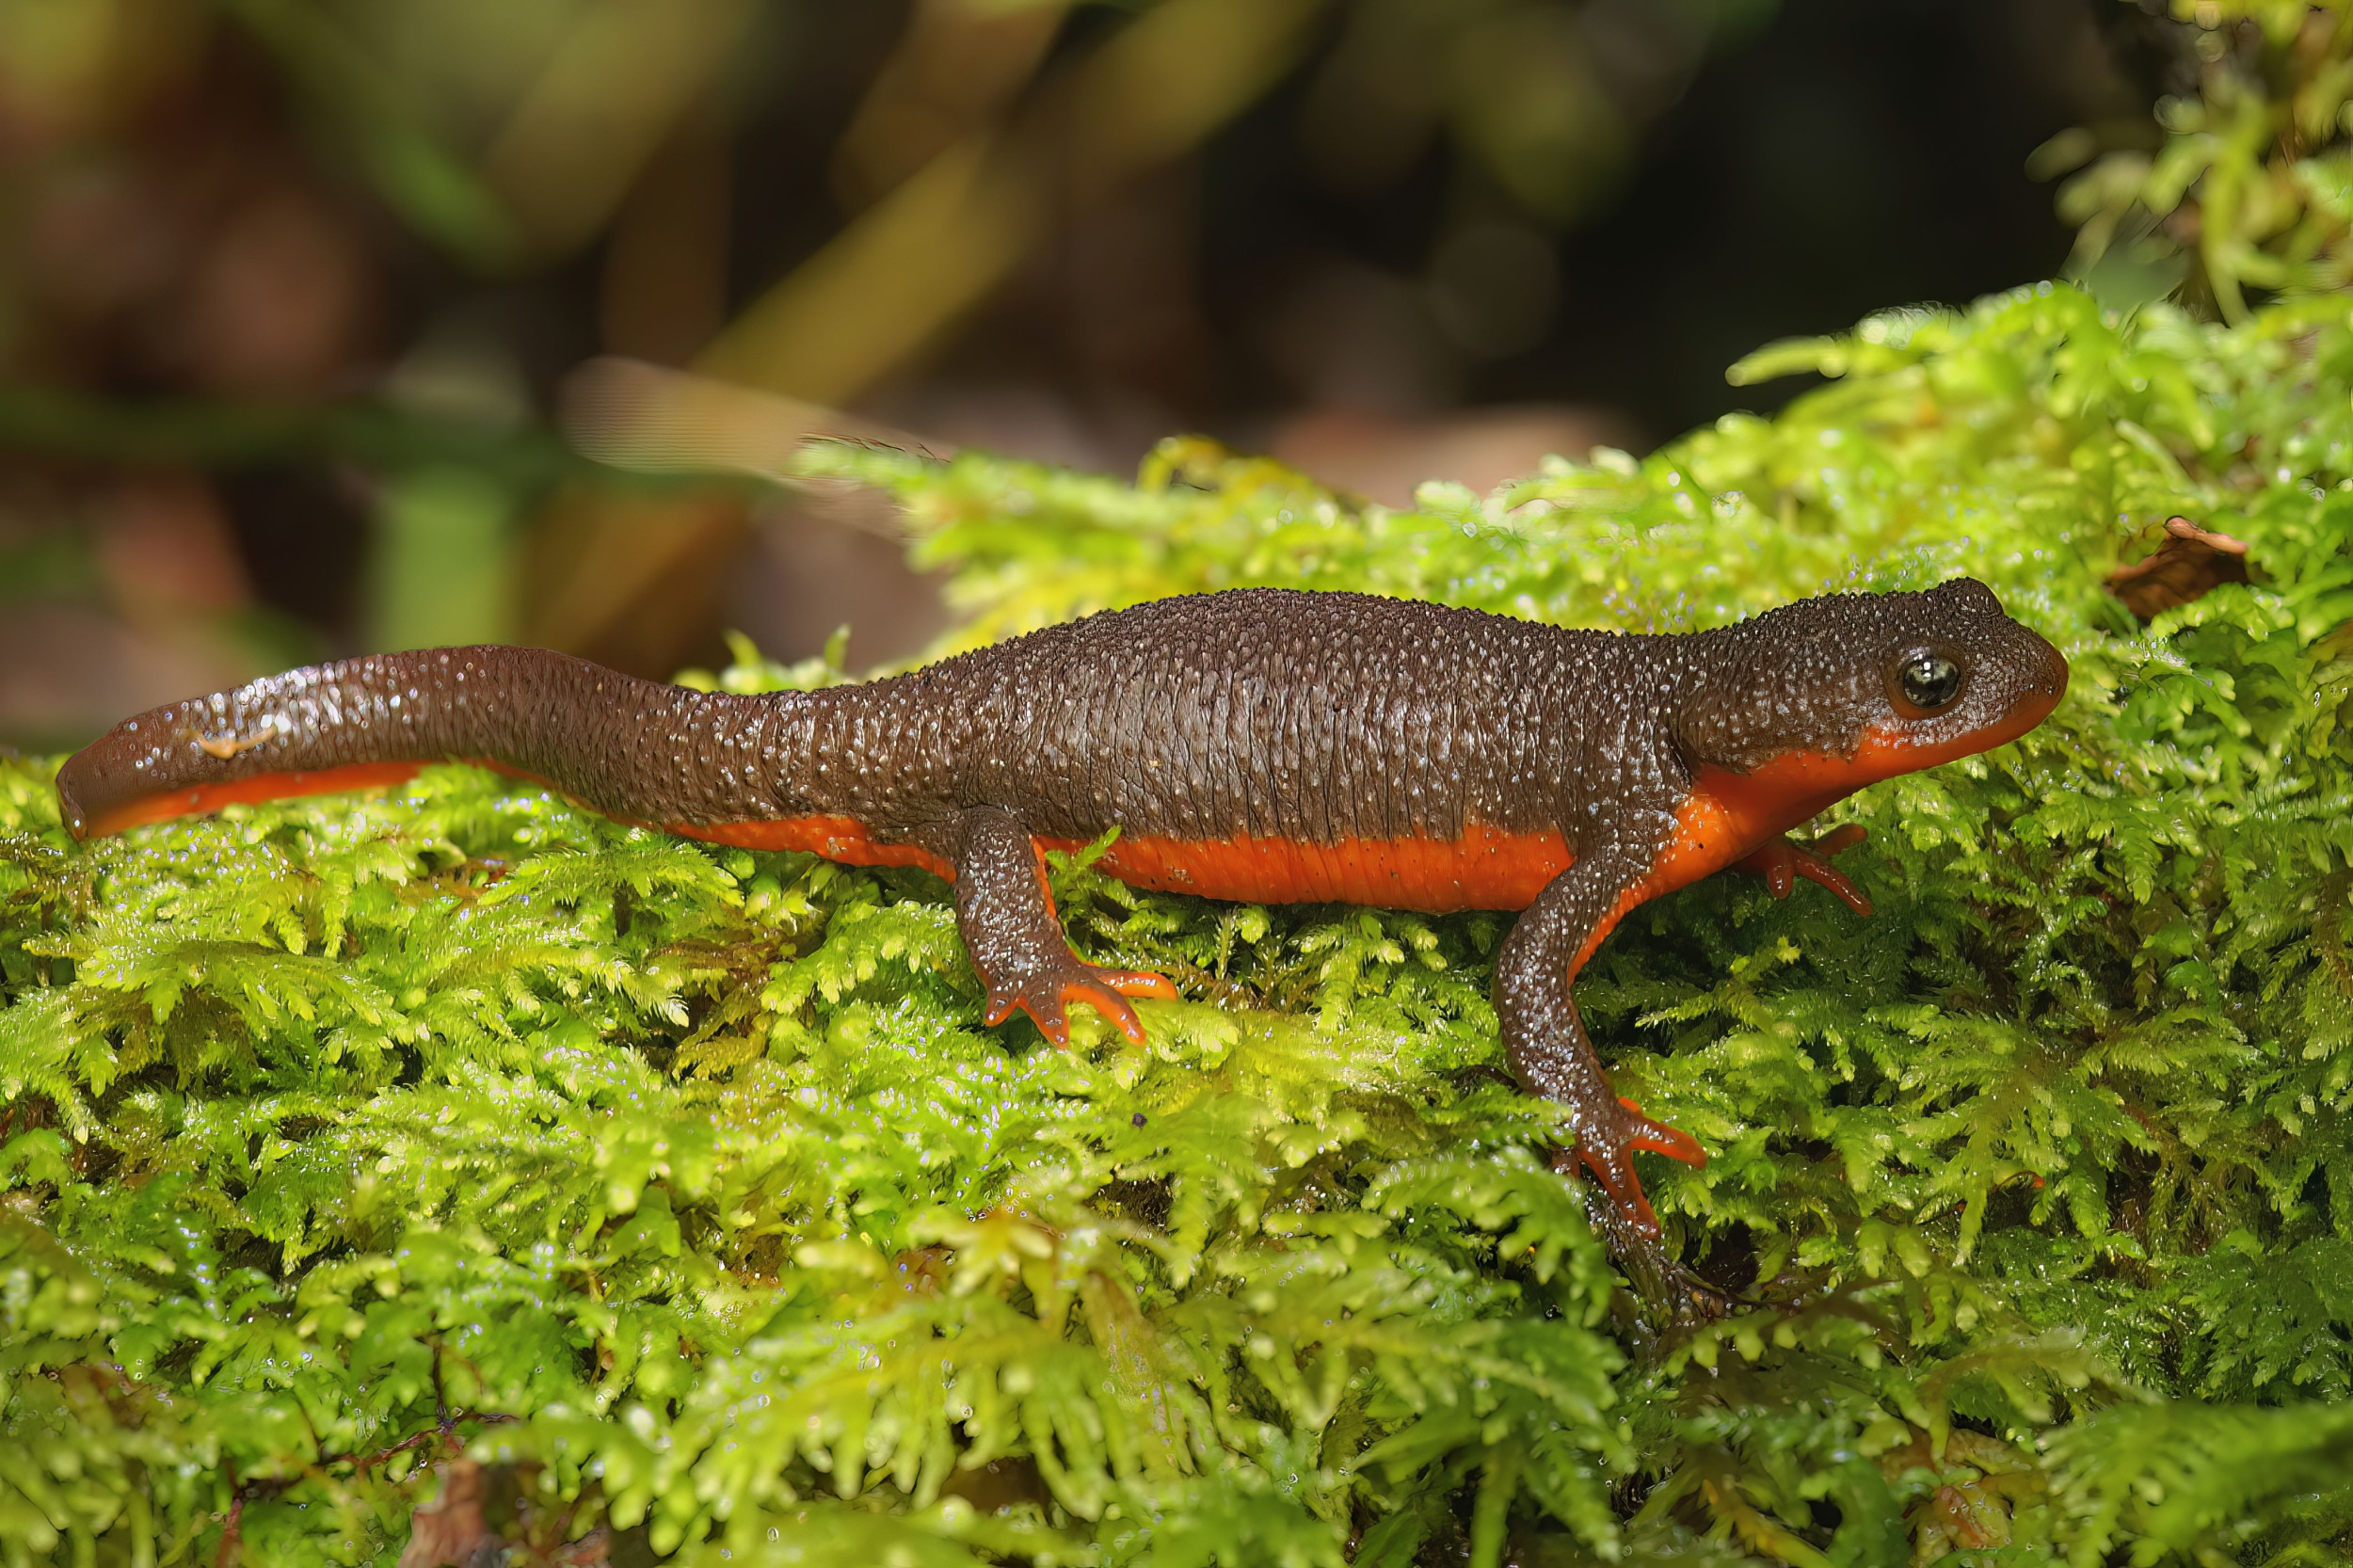 Female of the Species Really Is More Deadly—If You're a Toxic Newt